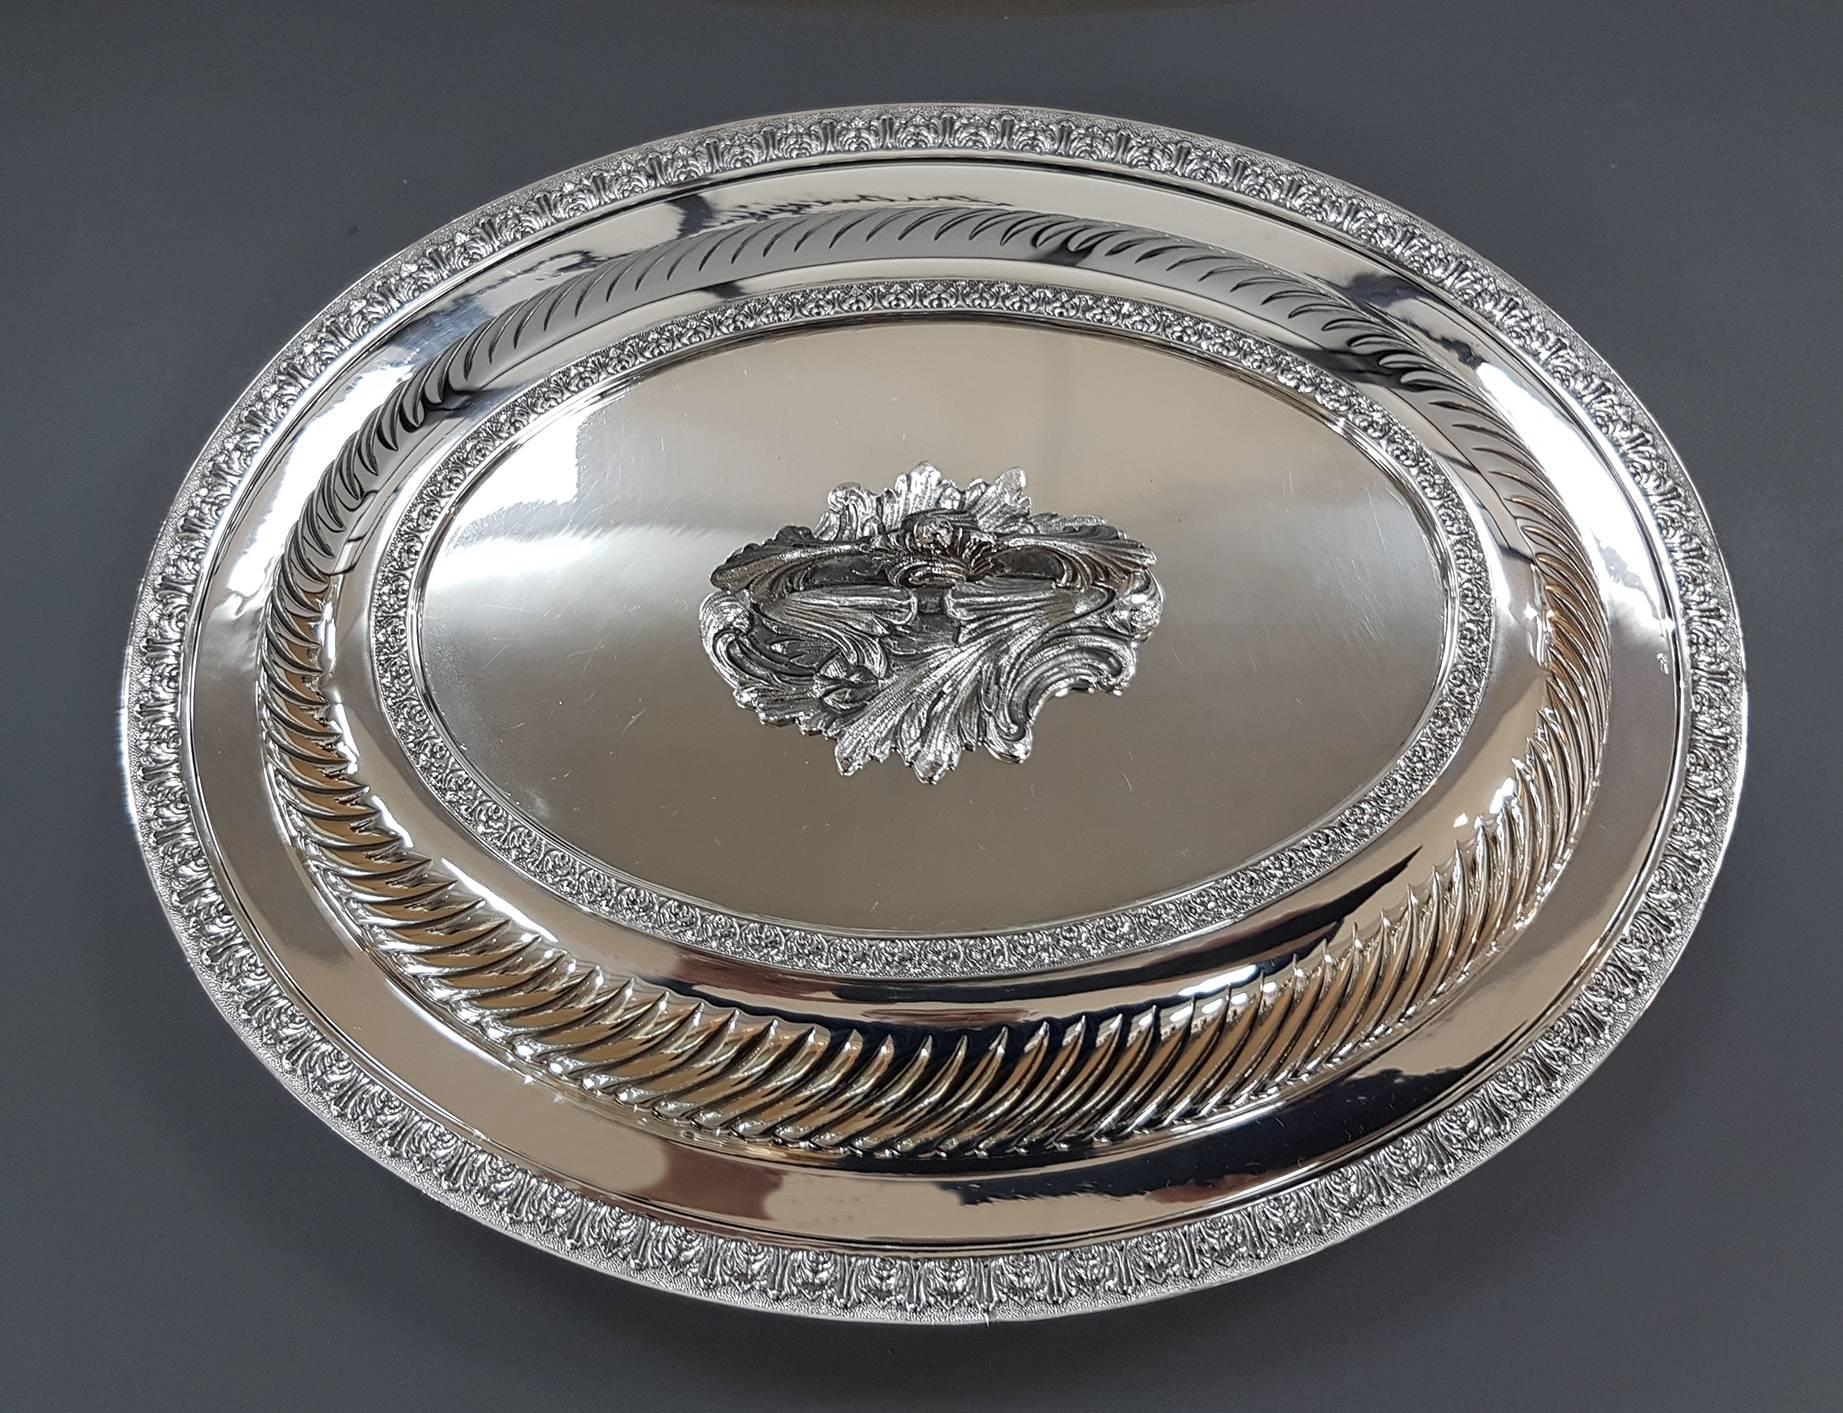 Oval Sterling SIlver Entree dish. 
It was completely hand-made, chiselled and rimmed with small leaves typical of the Renaissance style .
The handle is detachable to obtain 2 serving dishes.

